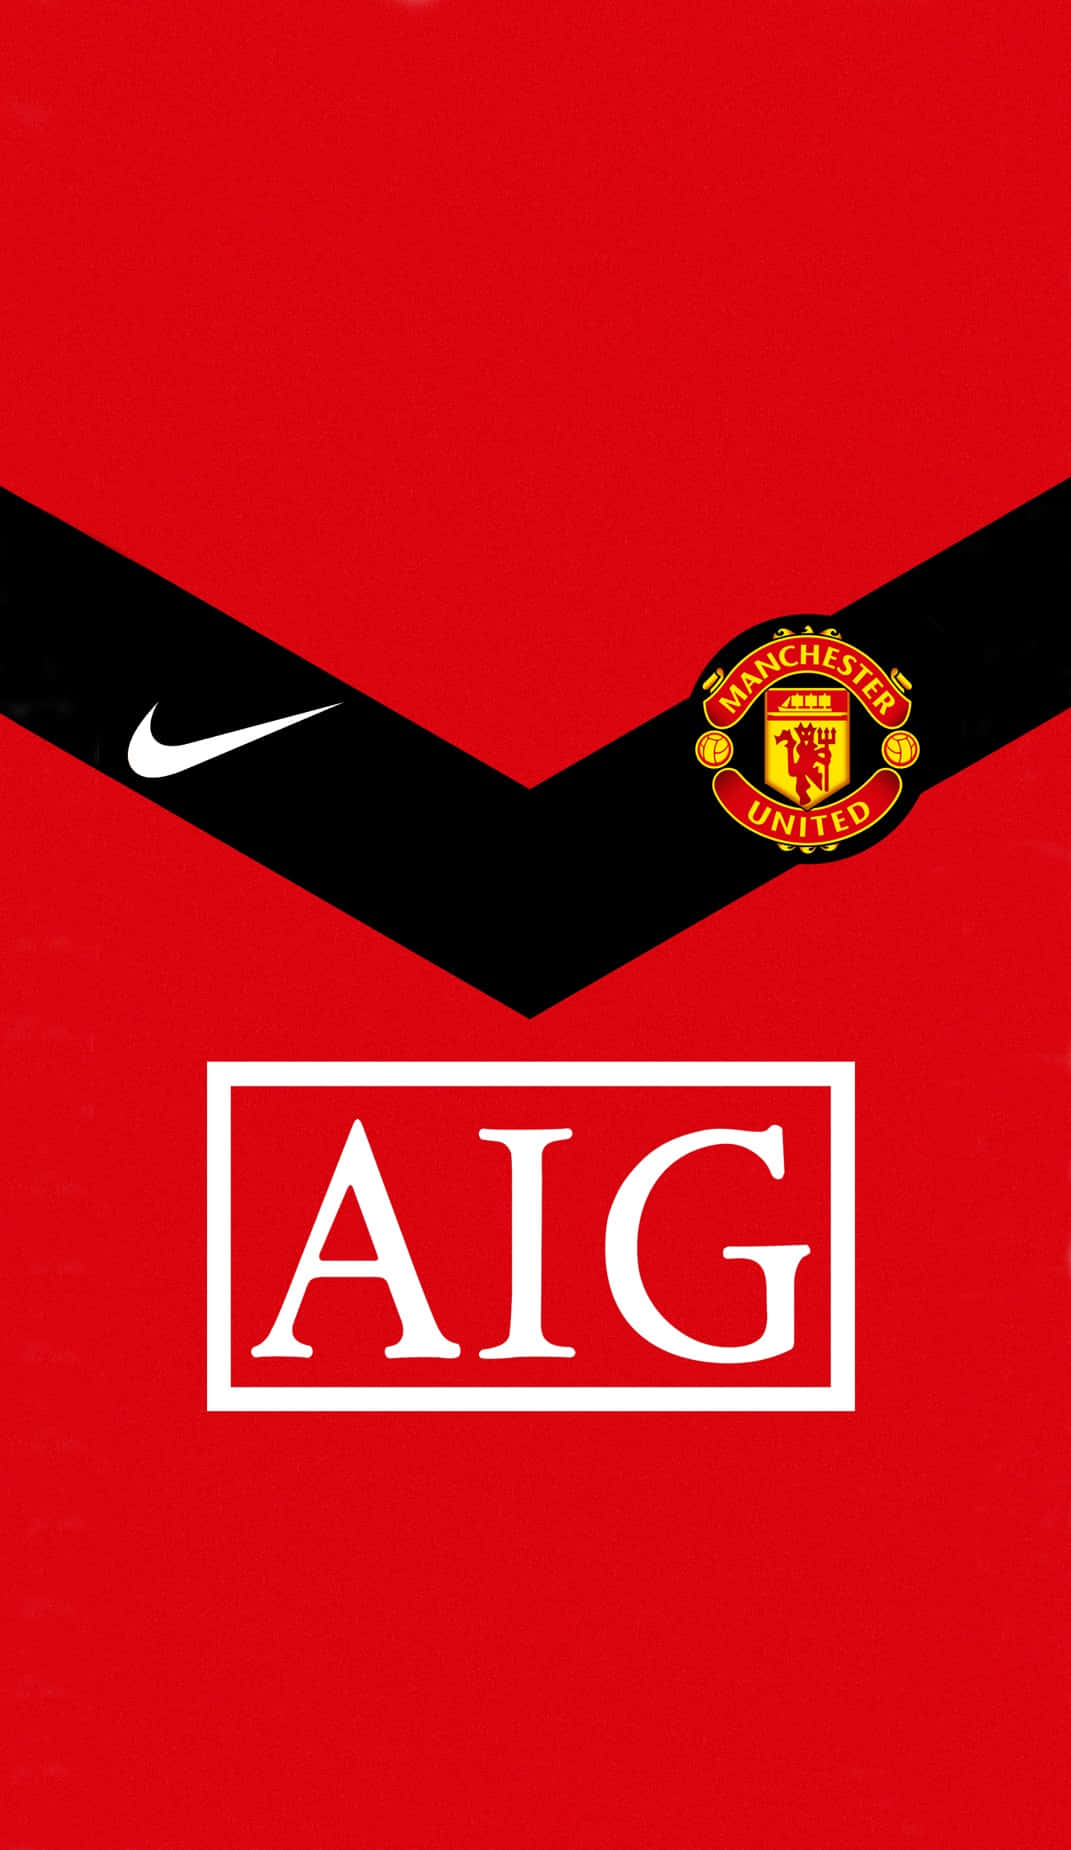 Free Manchester United iPhone Wallpaper Downloads, Manchester United iPhone Wallpaper for FREE